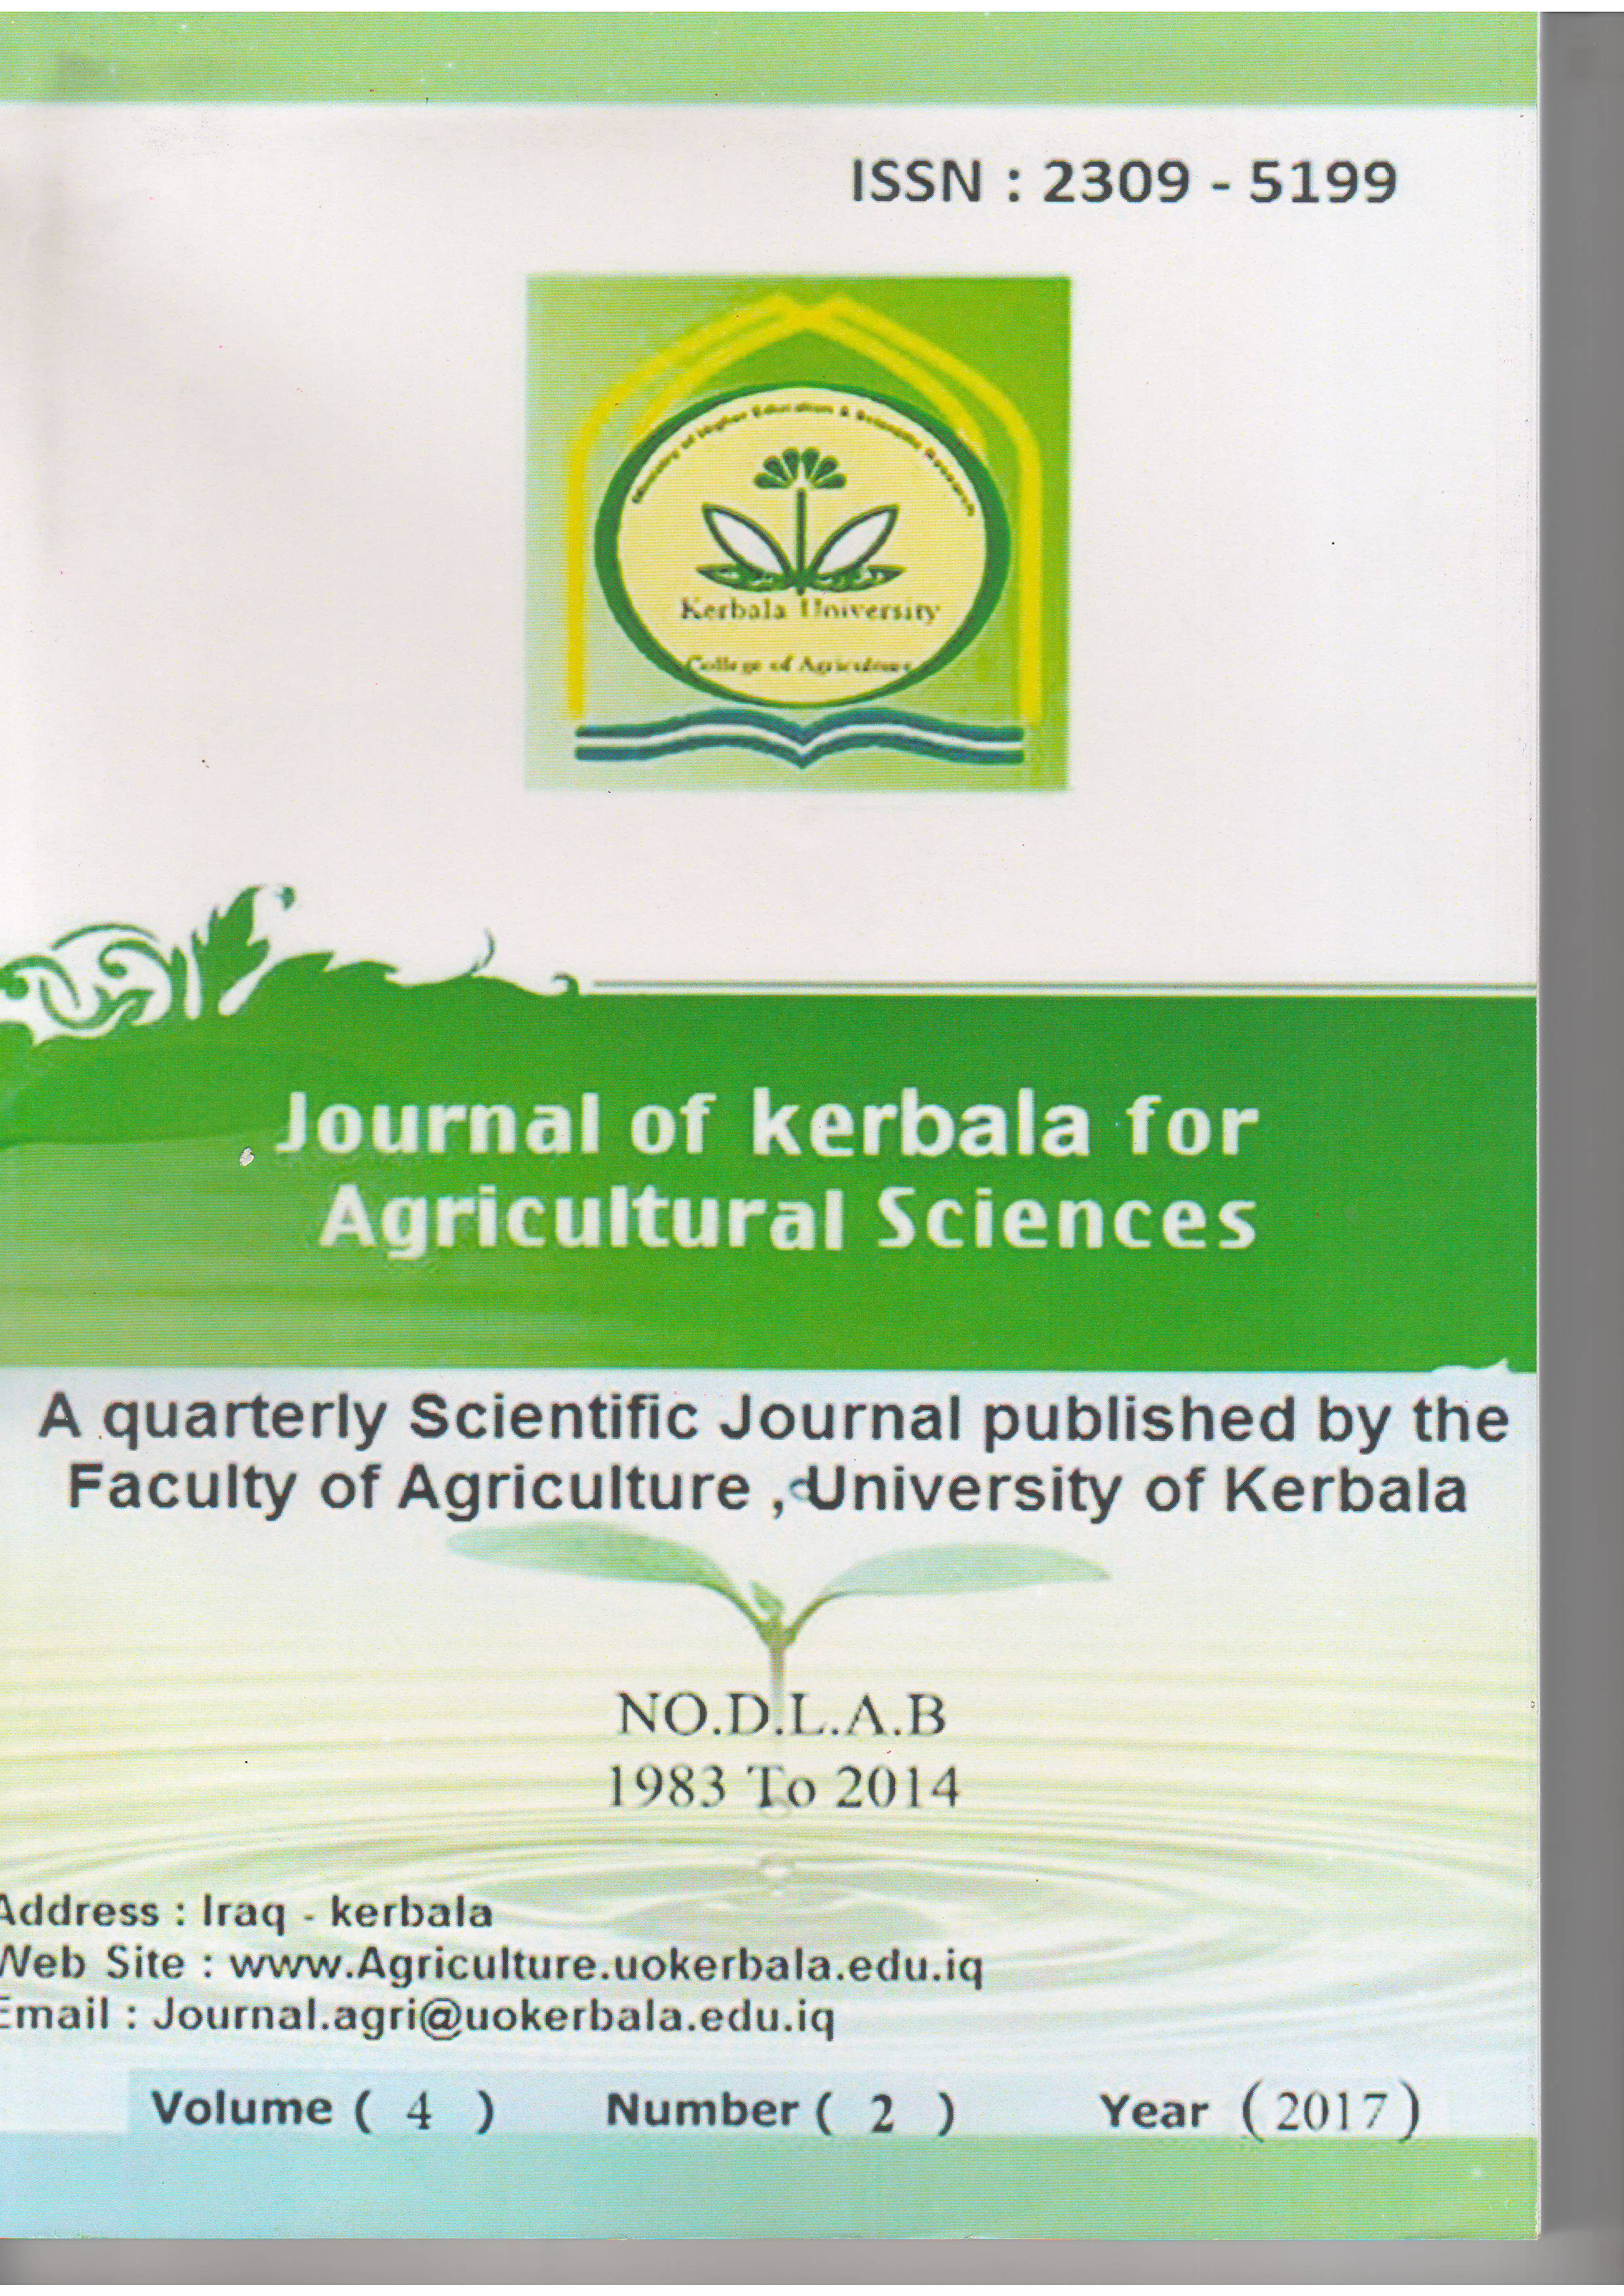 					View Vol. 4 No. 5 (2017): Proceedings of the Third Scientific Conference of the Faculty of Veterinary Medicine / University of Kerbala on 10th April 2017
				